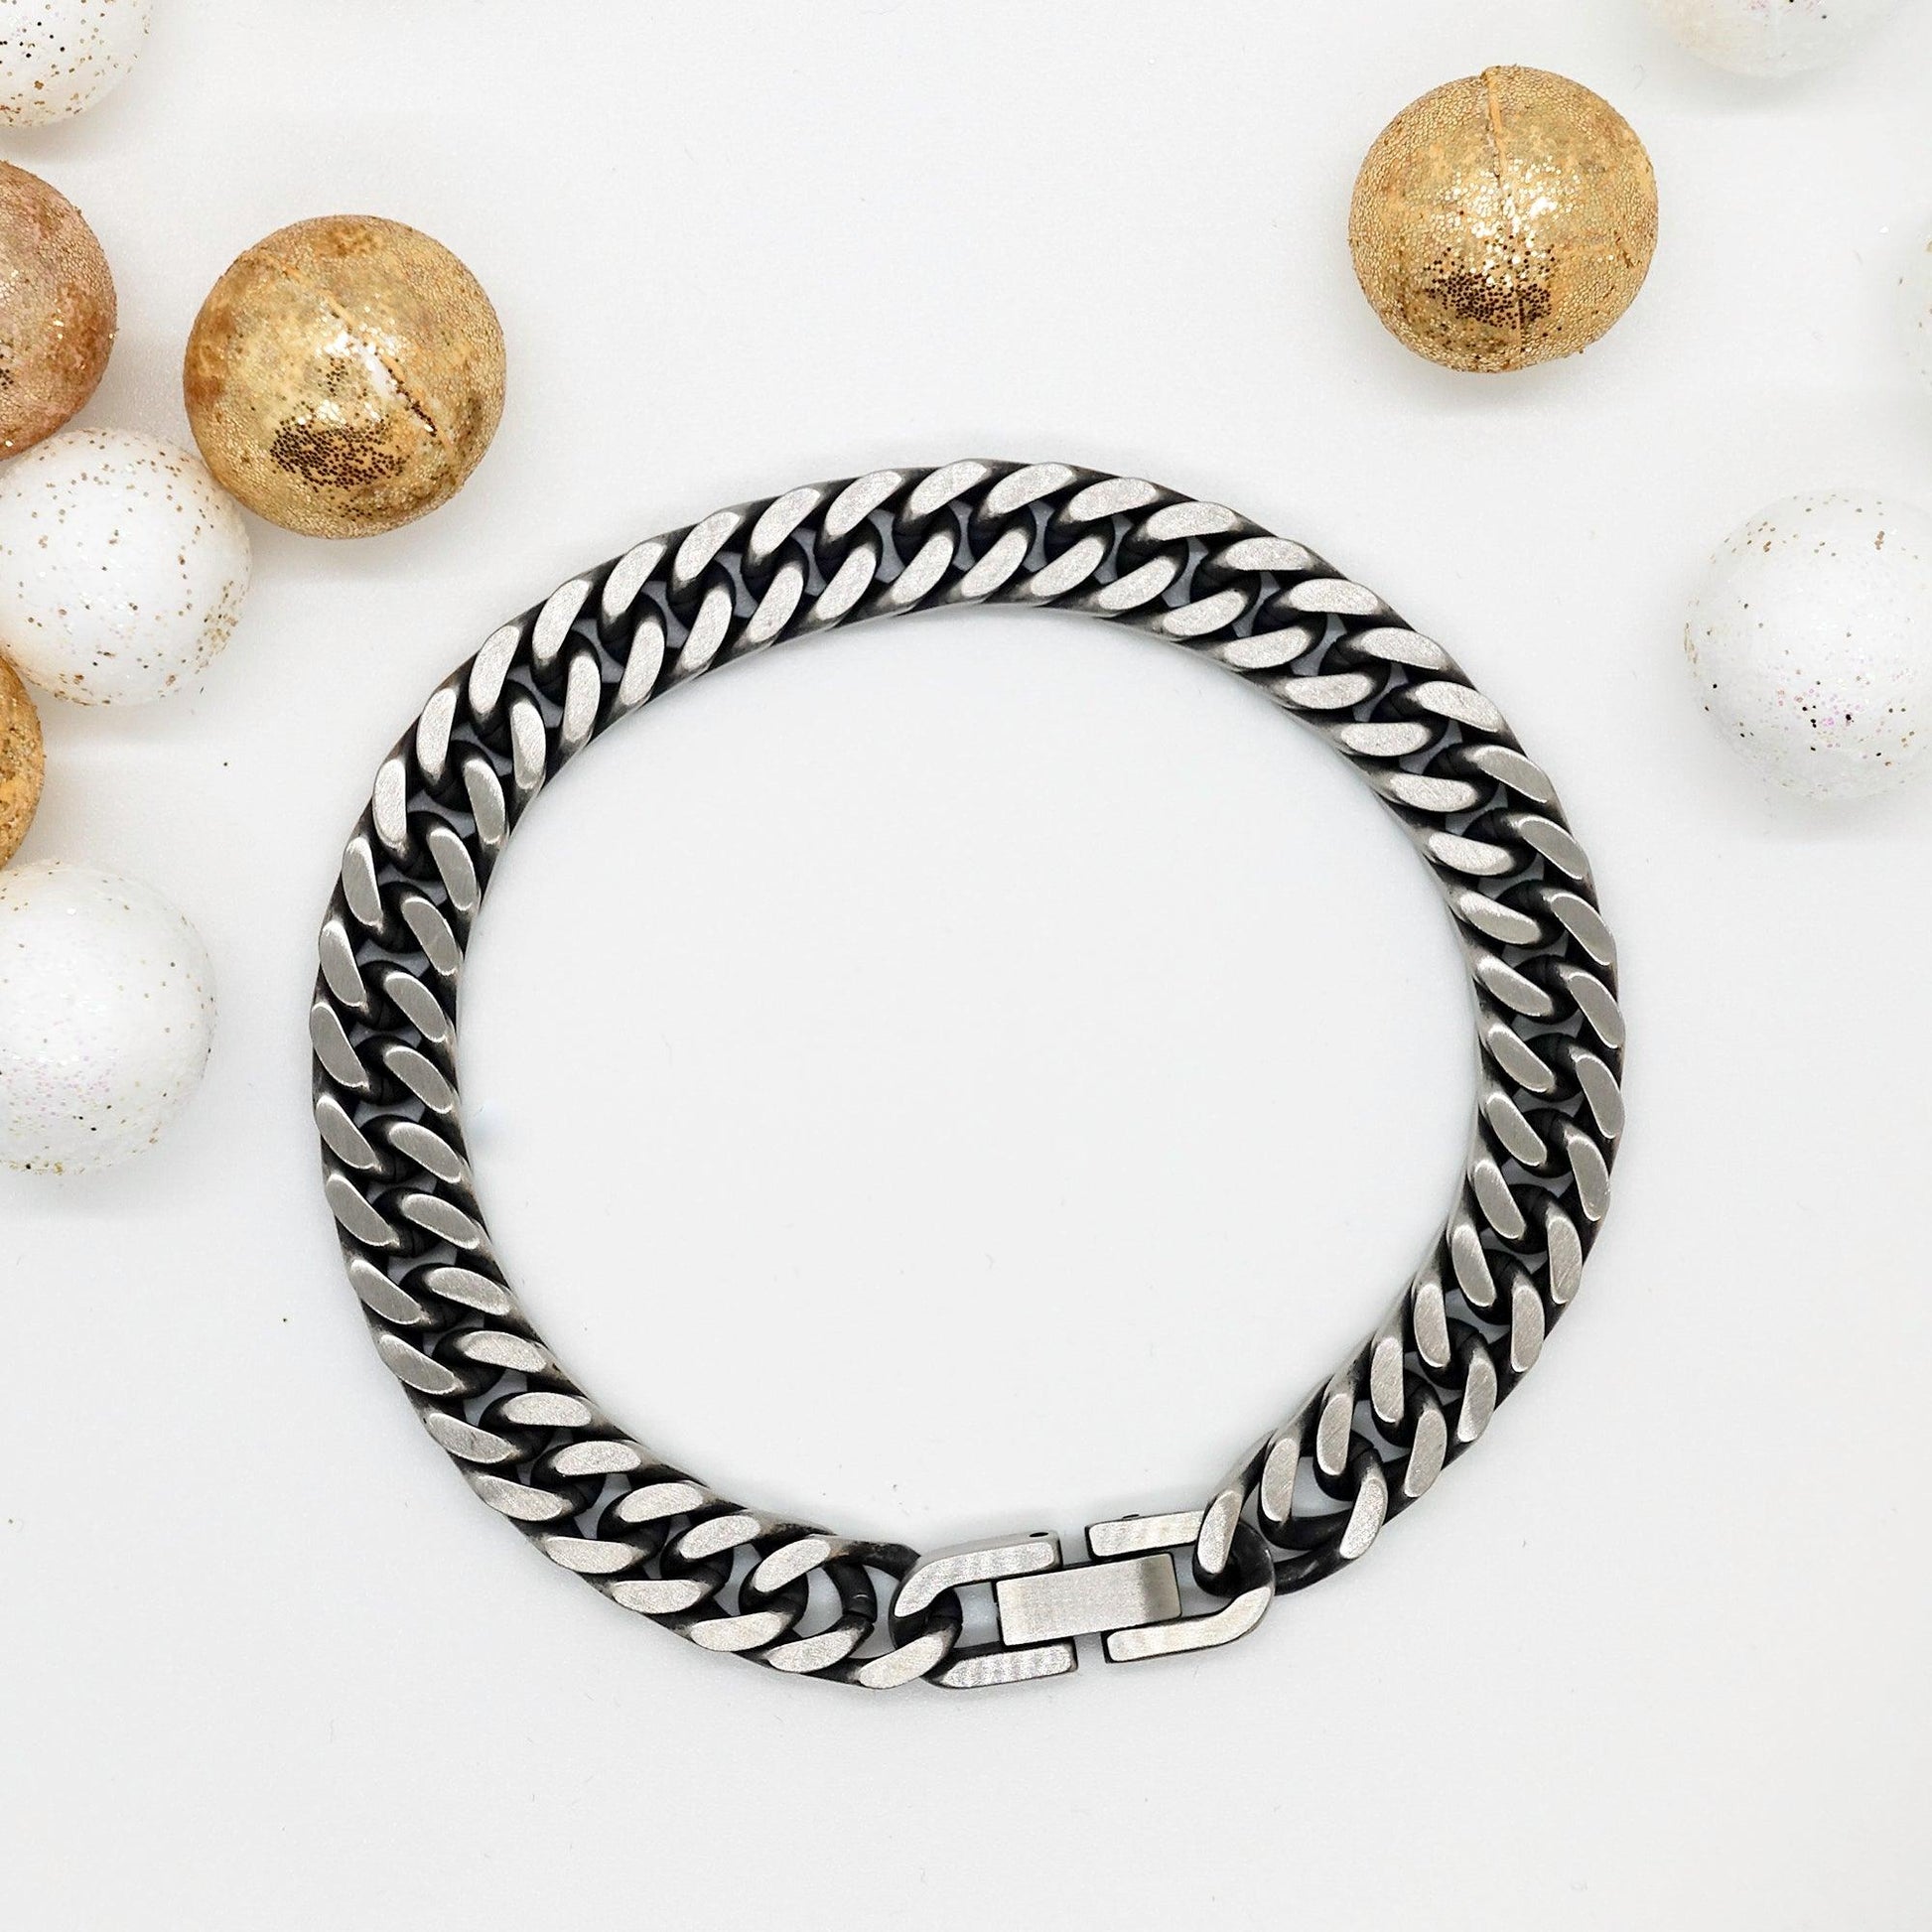 Remarkable Veterinary Assistant Gifts, Your dedication and hard work, Inspirational Birthday Christmas Unique Cuban Link Chain Bracelet For Veterinary Assistant, Coworkers, Men, Women, Friends - Mallard Moon Gift Shop